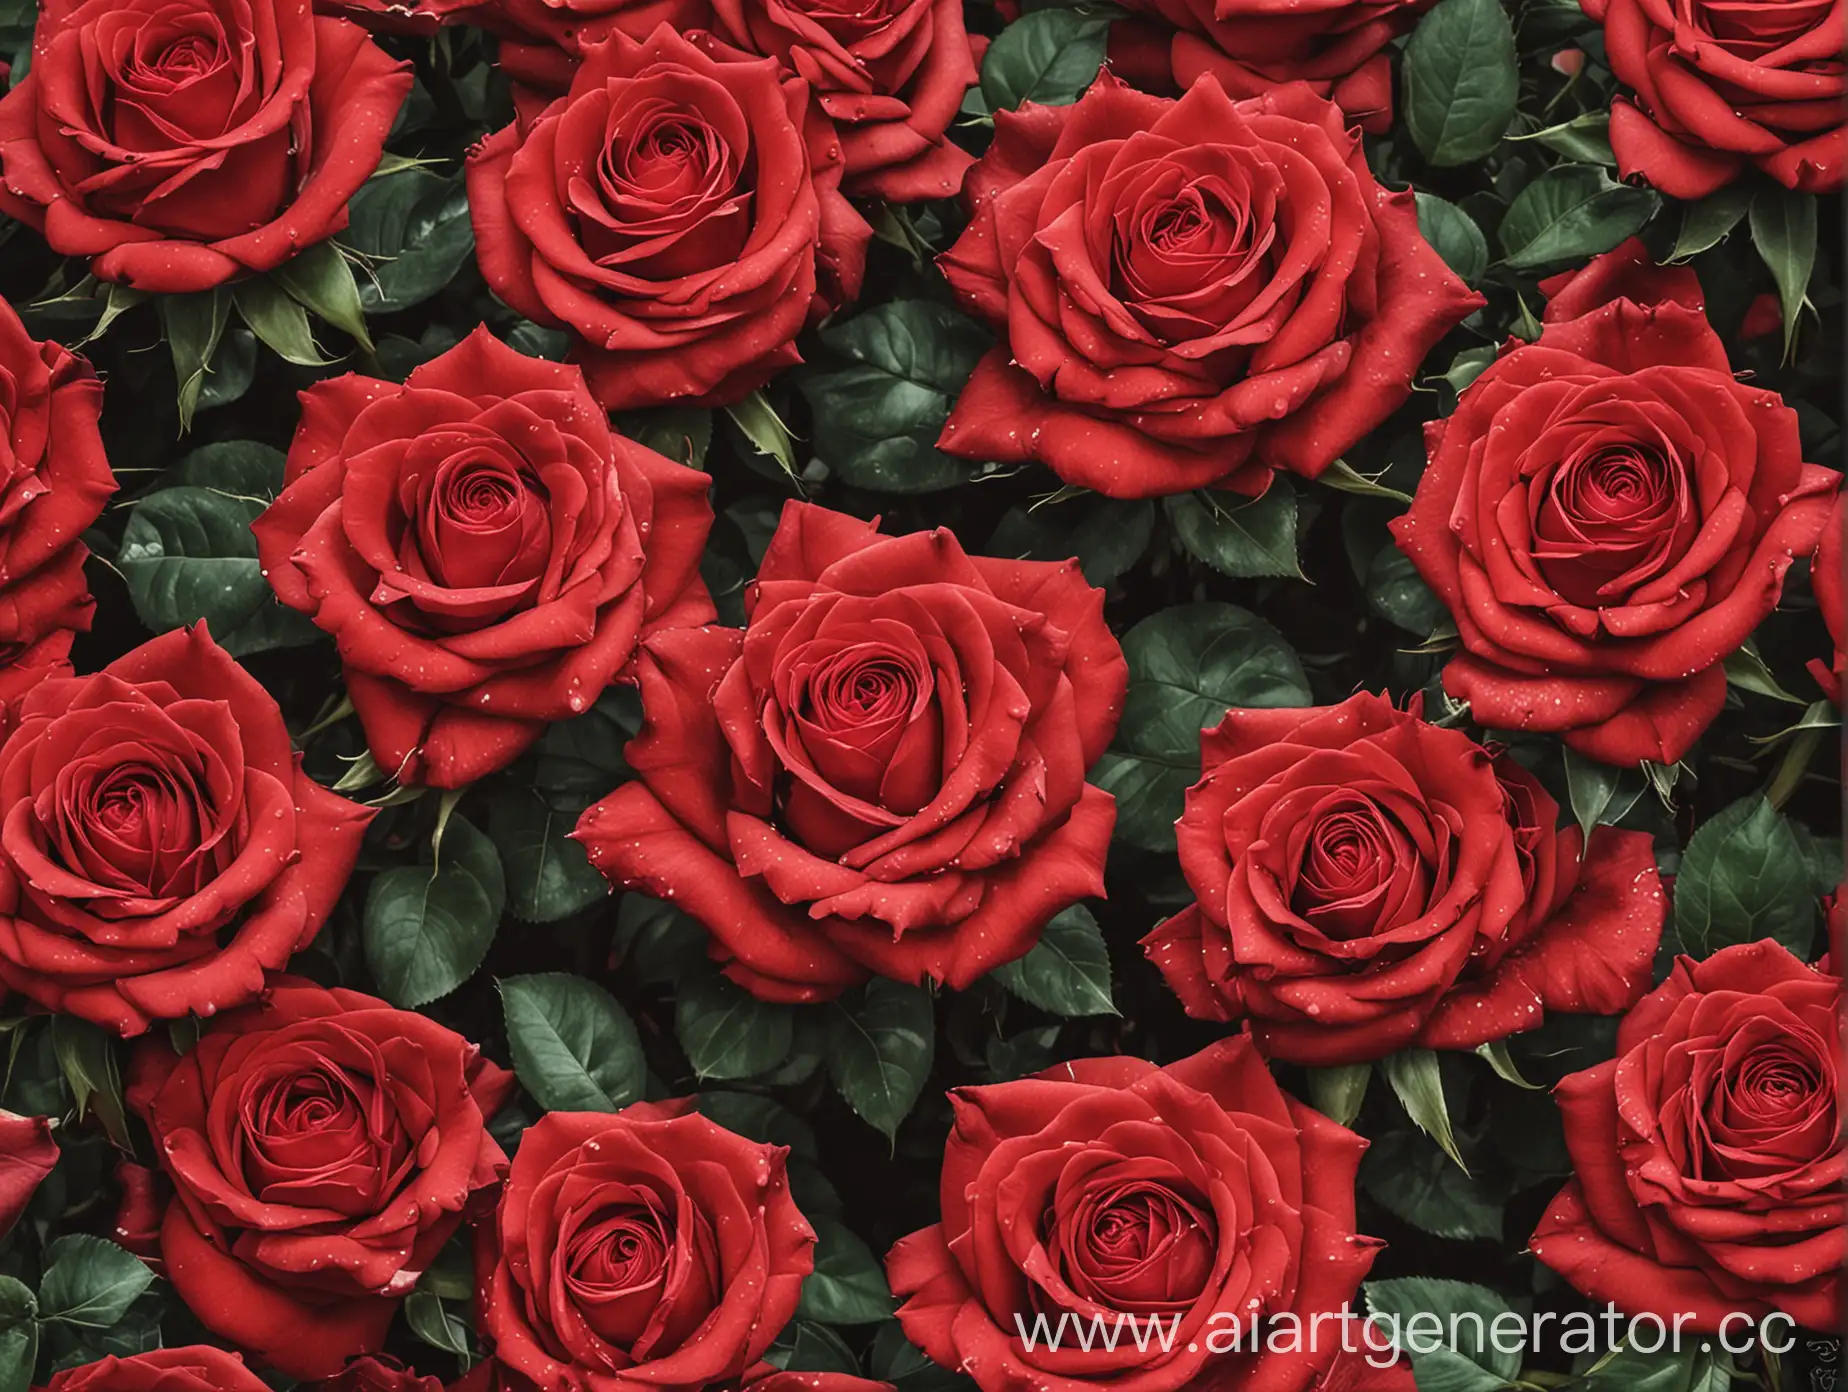 Vibrant-Red-Roses-Blooming-in-a-Lush-Garden